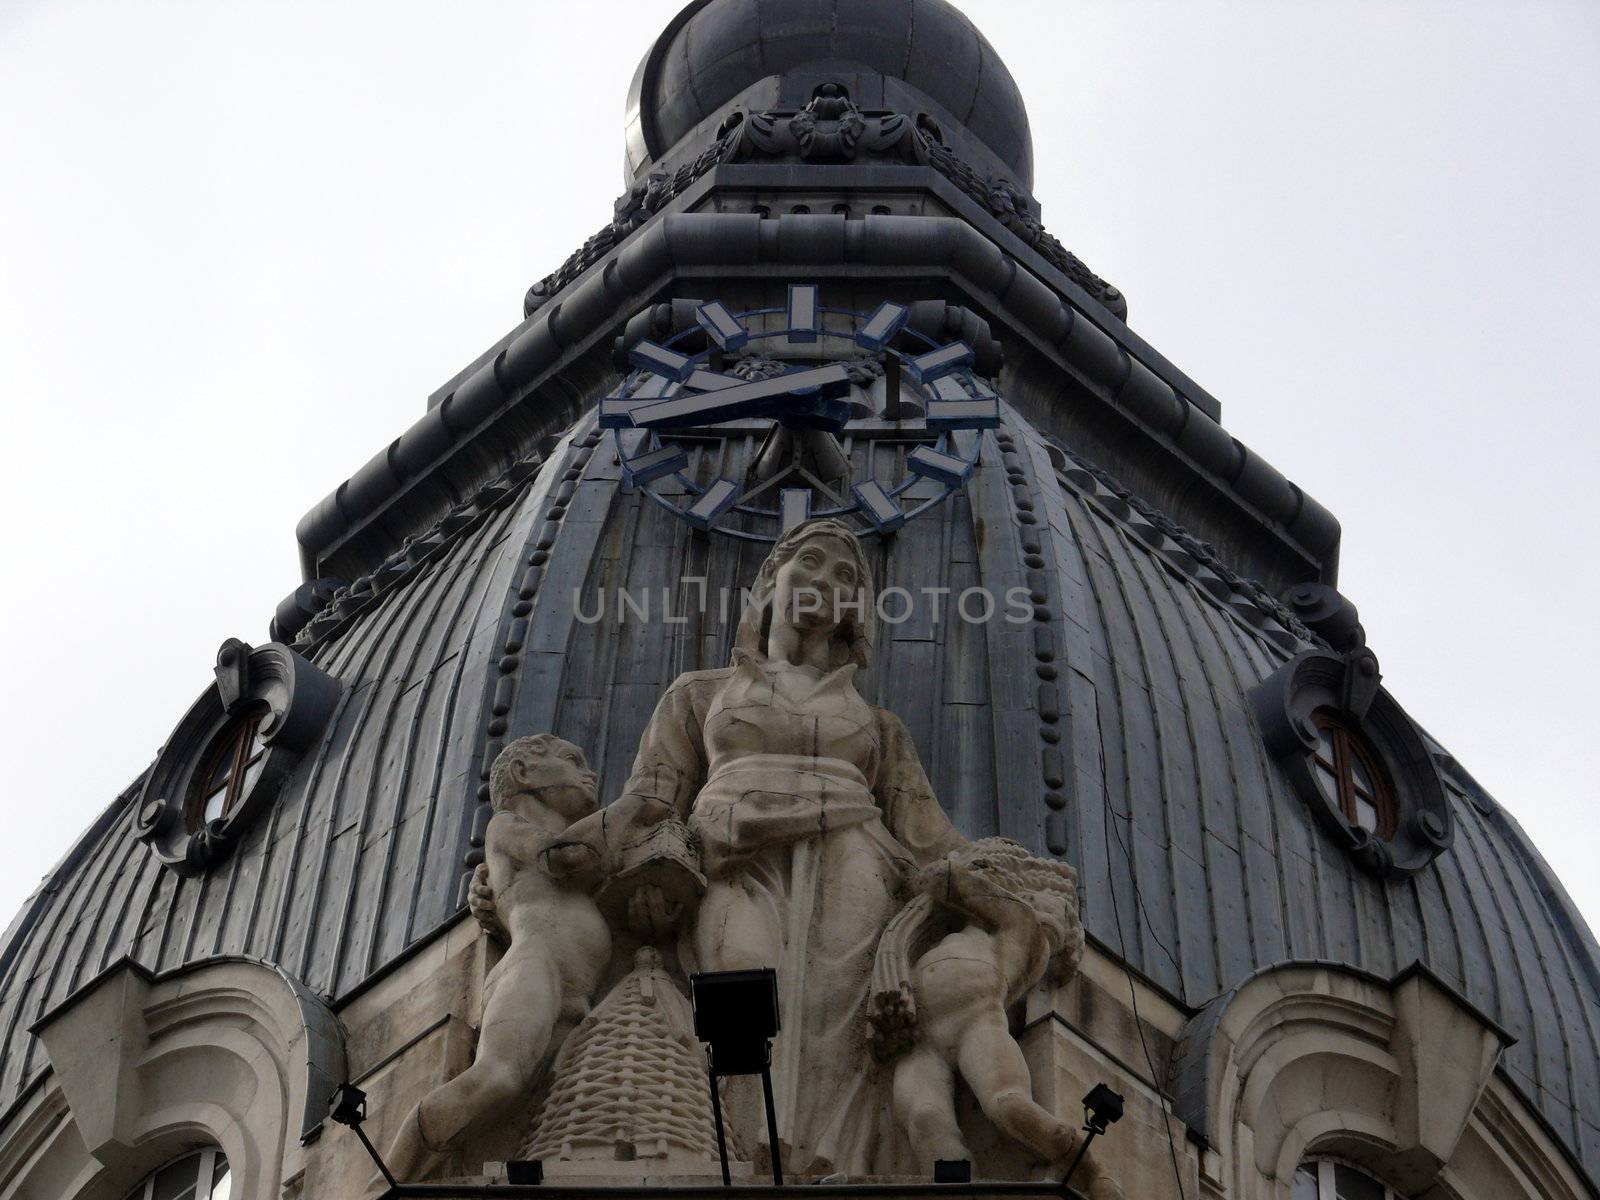 Sculptures with clock in the roof. Sofia, Bulgaria by Stoyanov